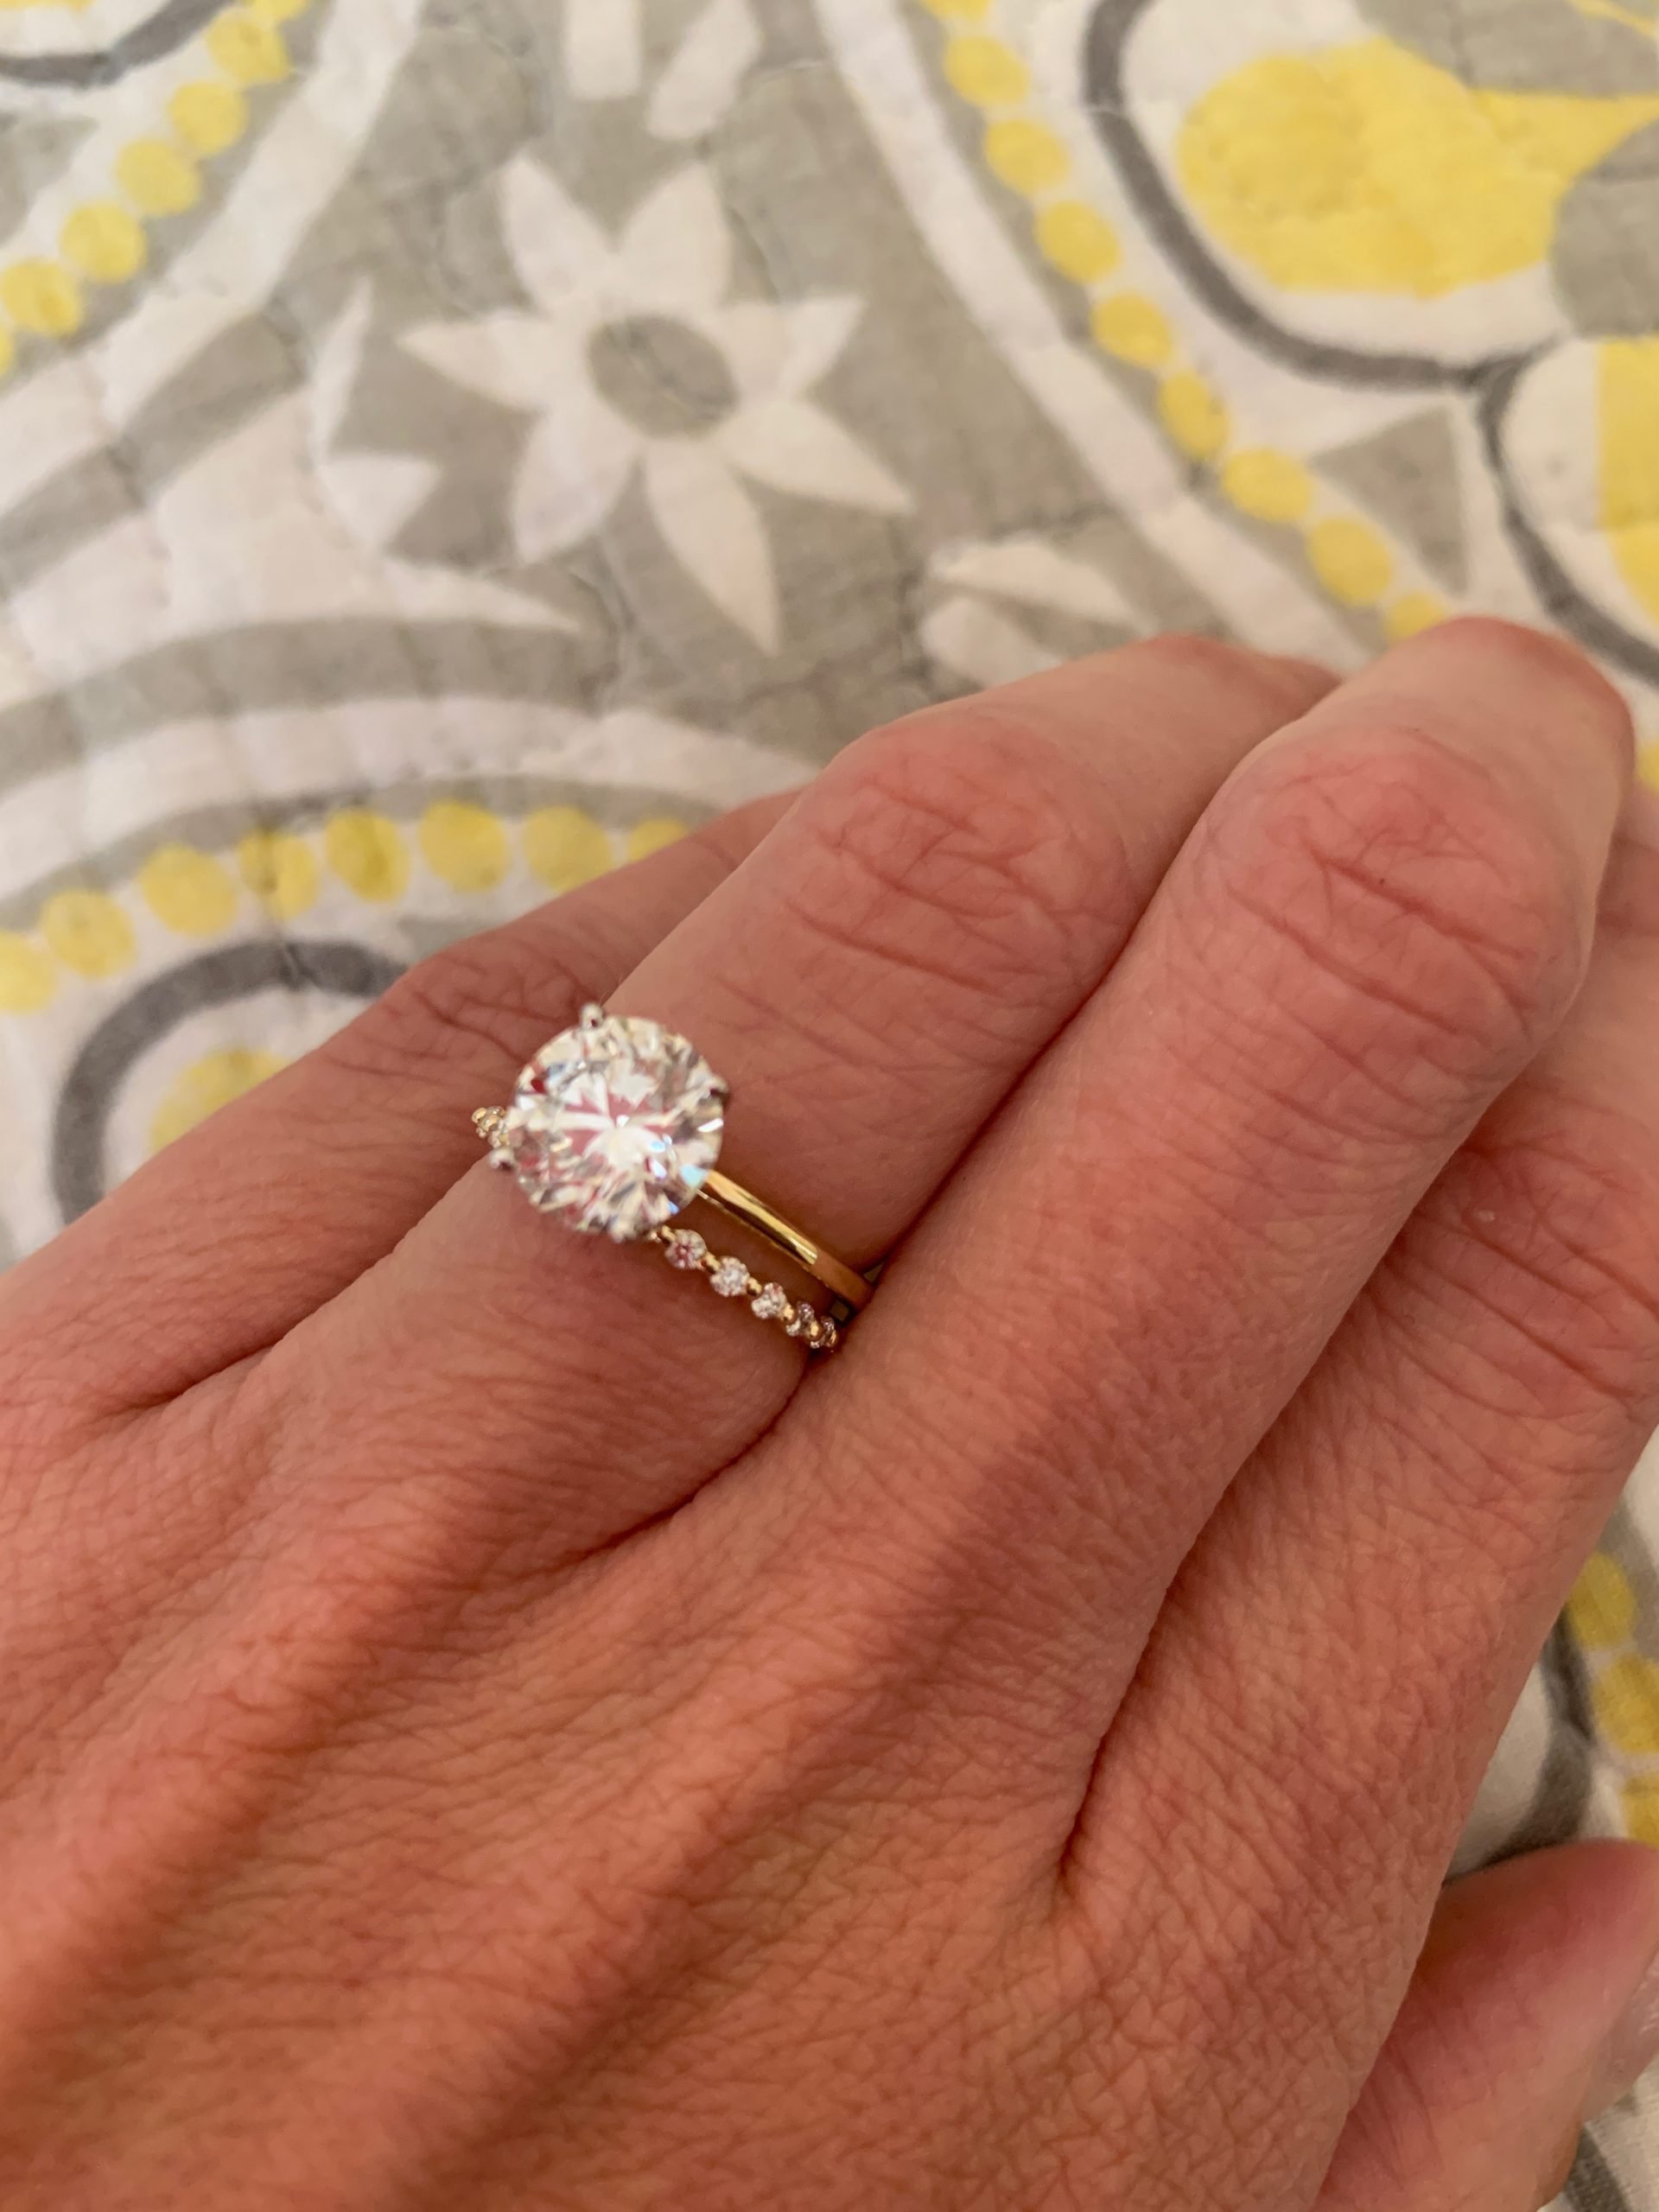 Post pics of your single prong wedding bands with your solitaires!